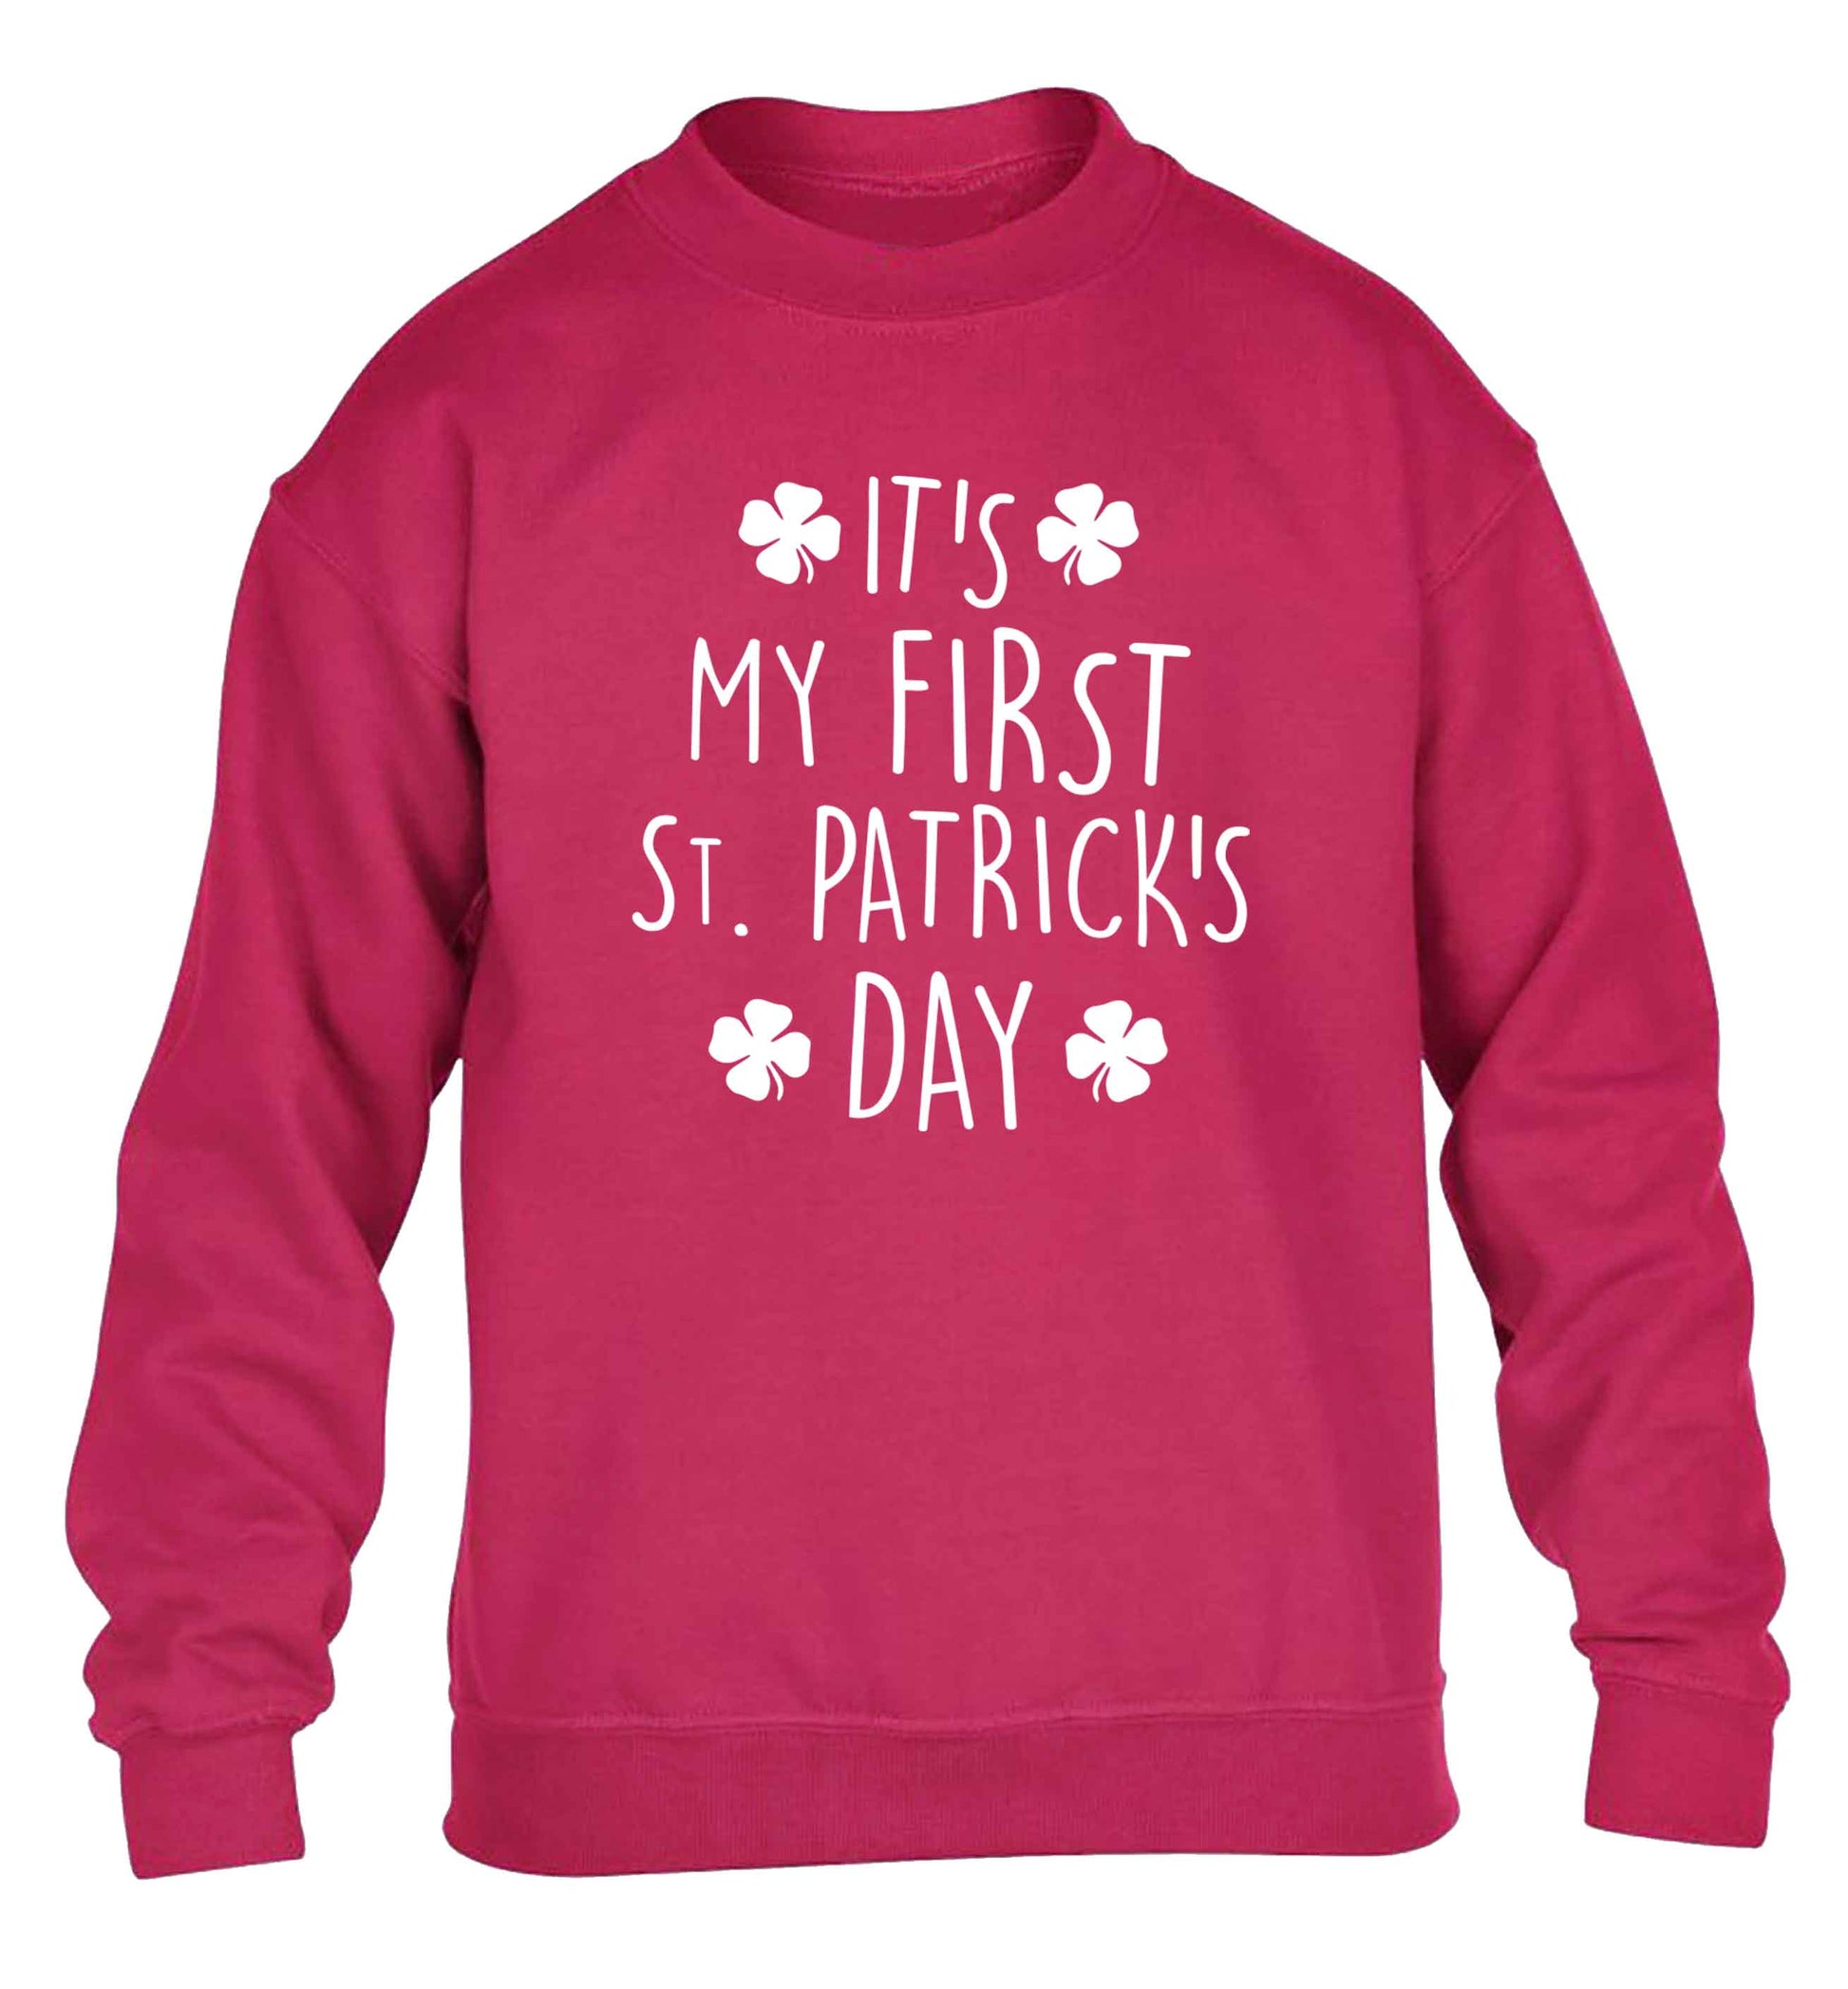 It's my first St.Patrick's day children's pink sweater 12-13 Years